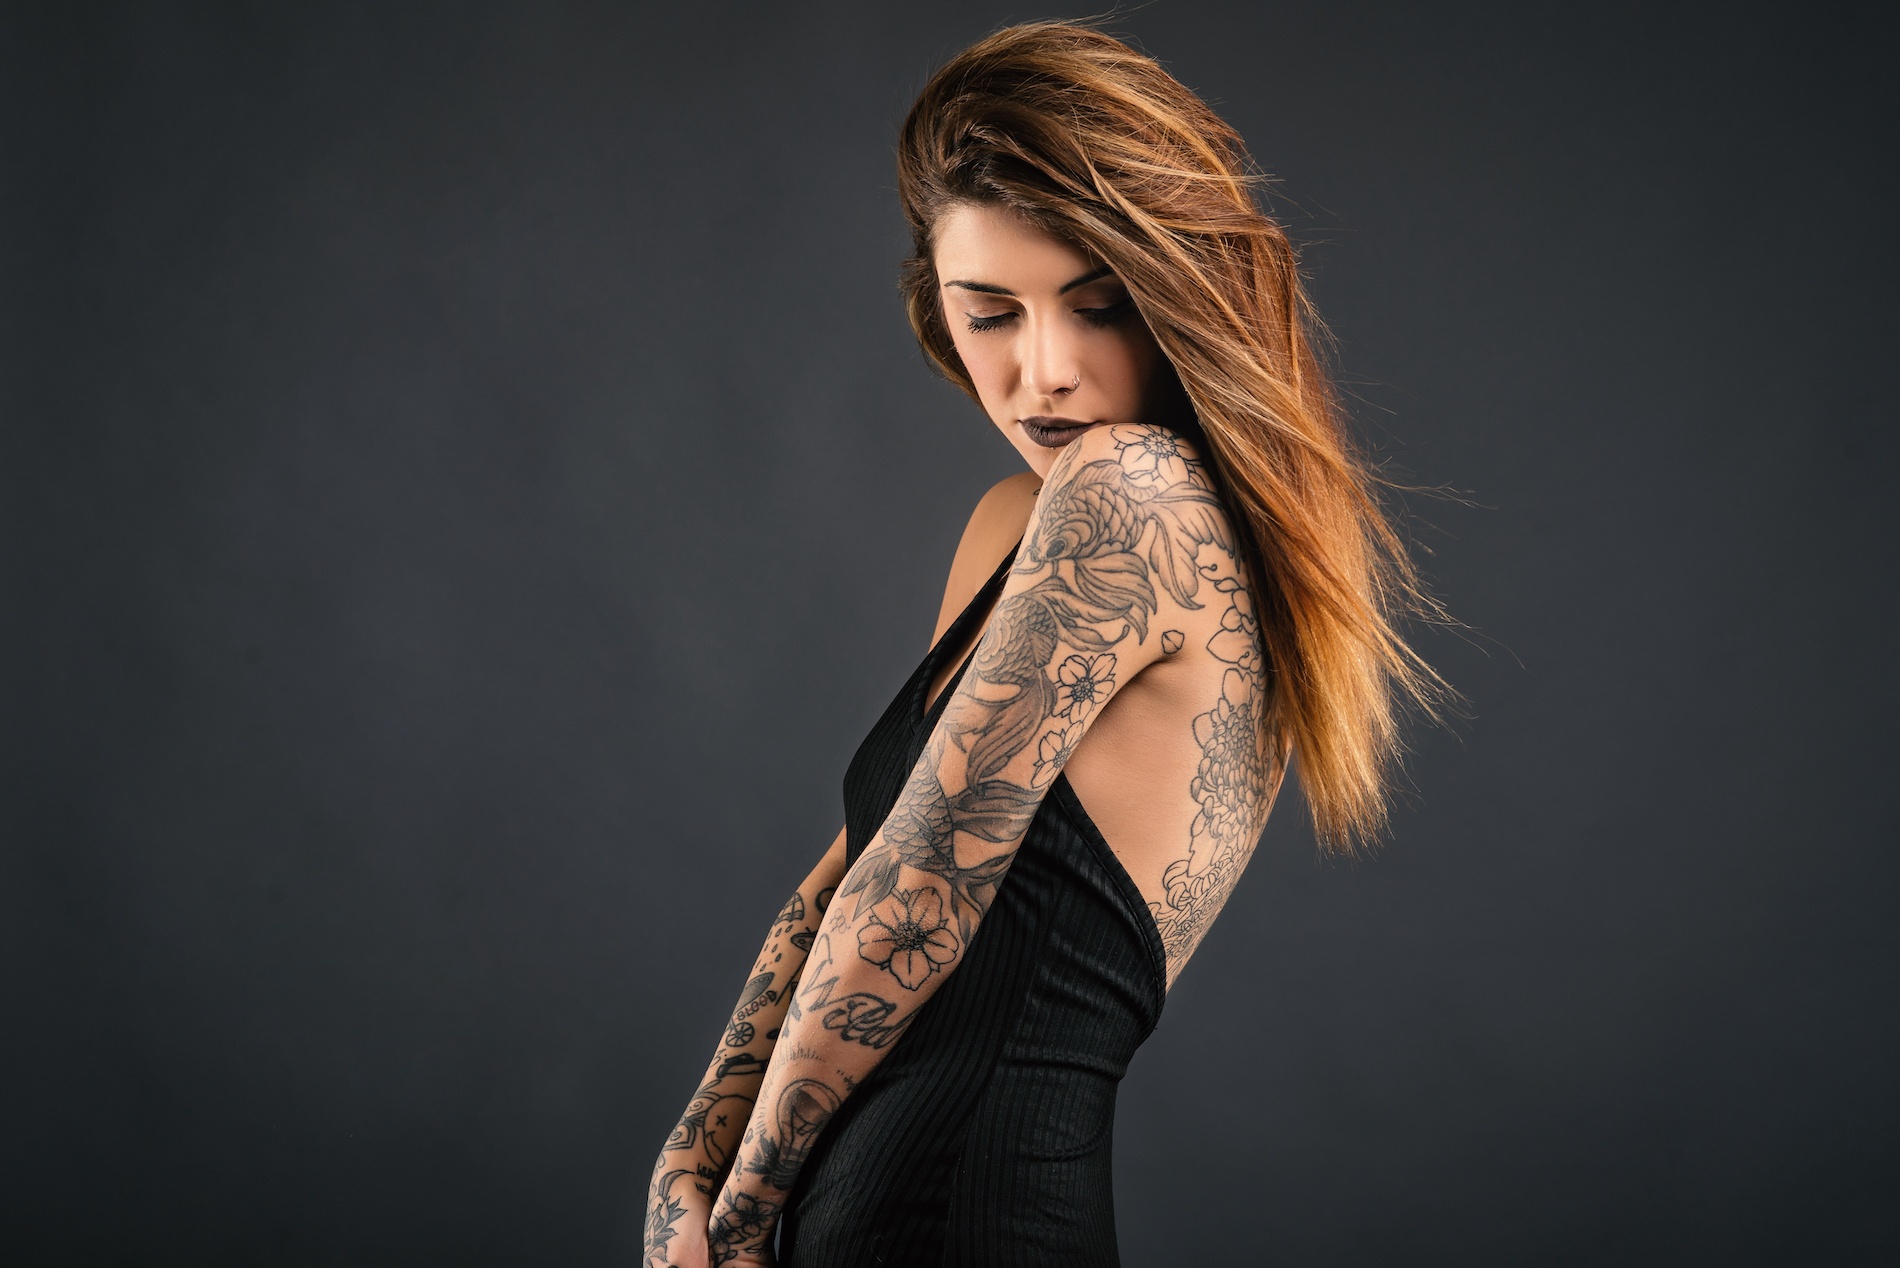 Old Woman with Body Covered in Tattoos Free Stock Photo | picjumbo